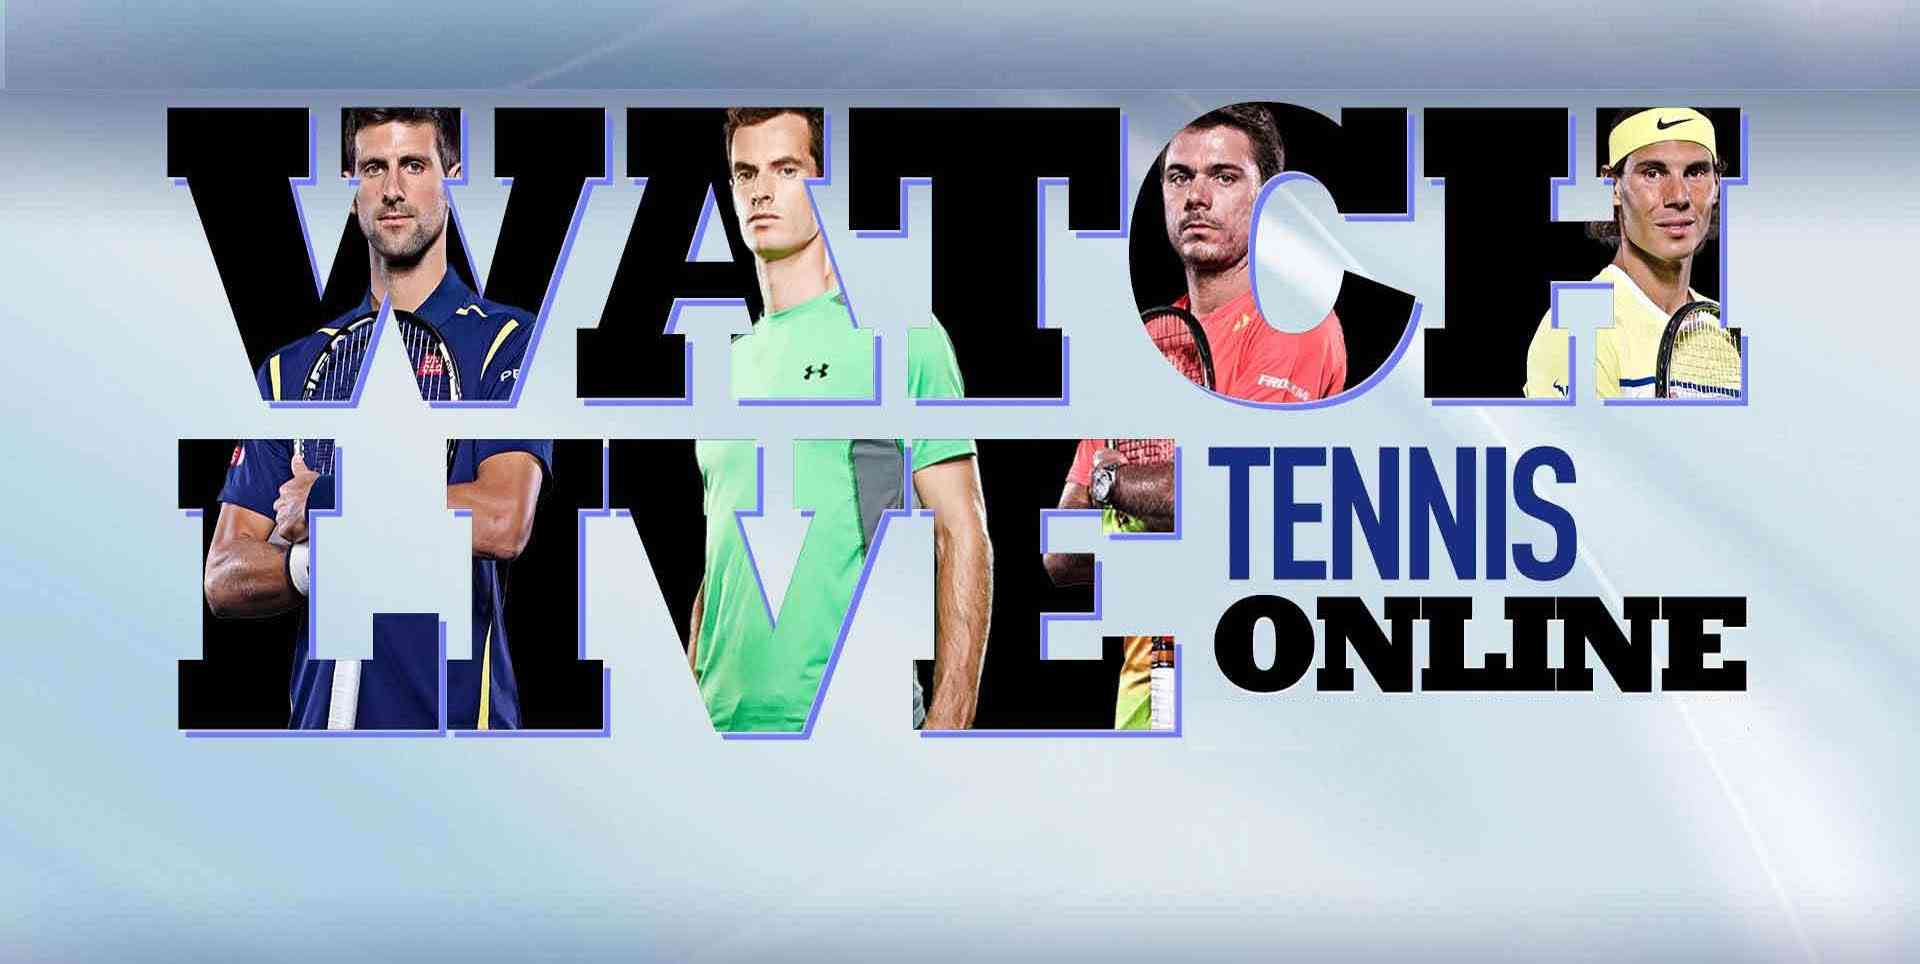 hall-of-fame-open-atp-tennis-live-stream